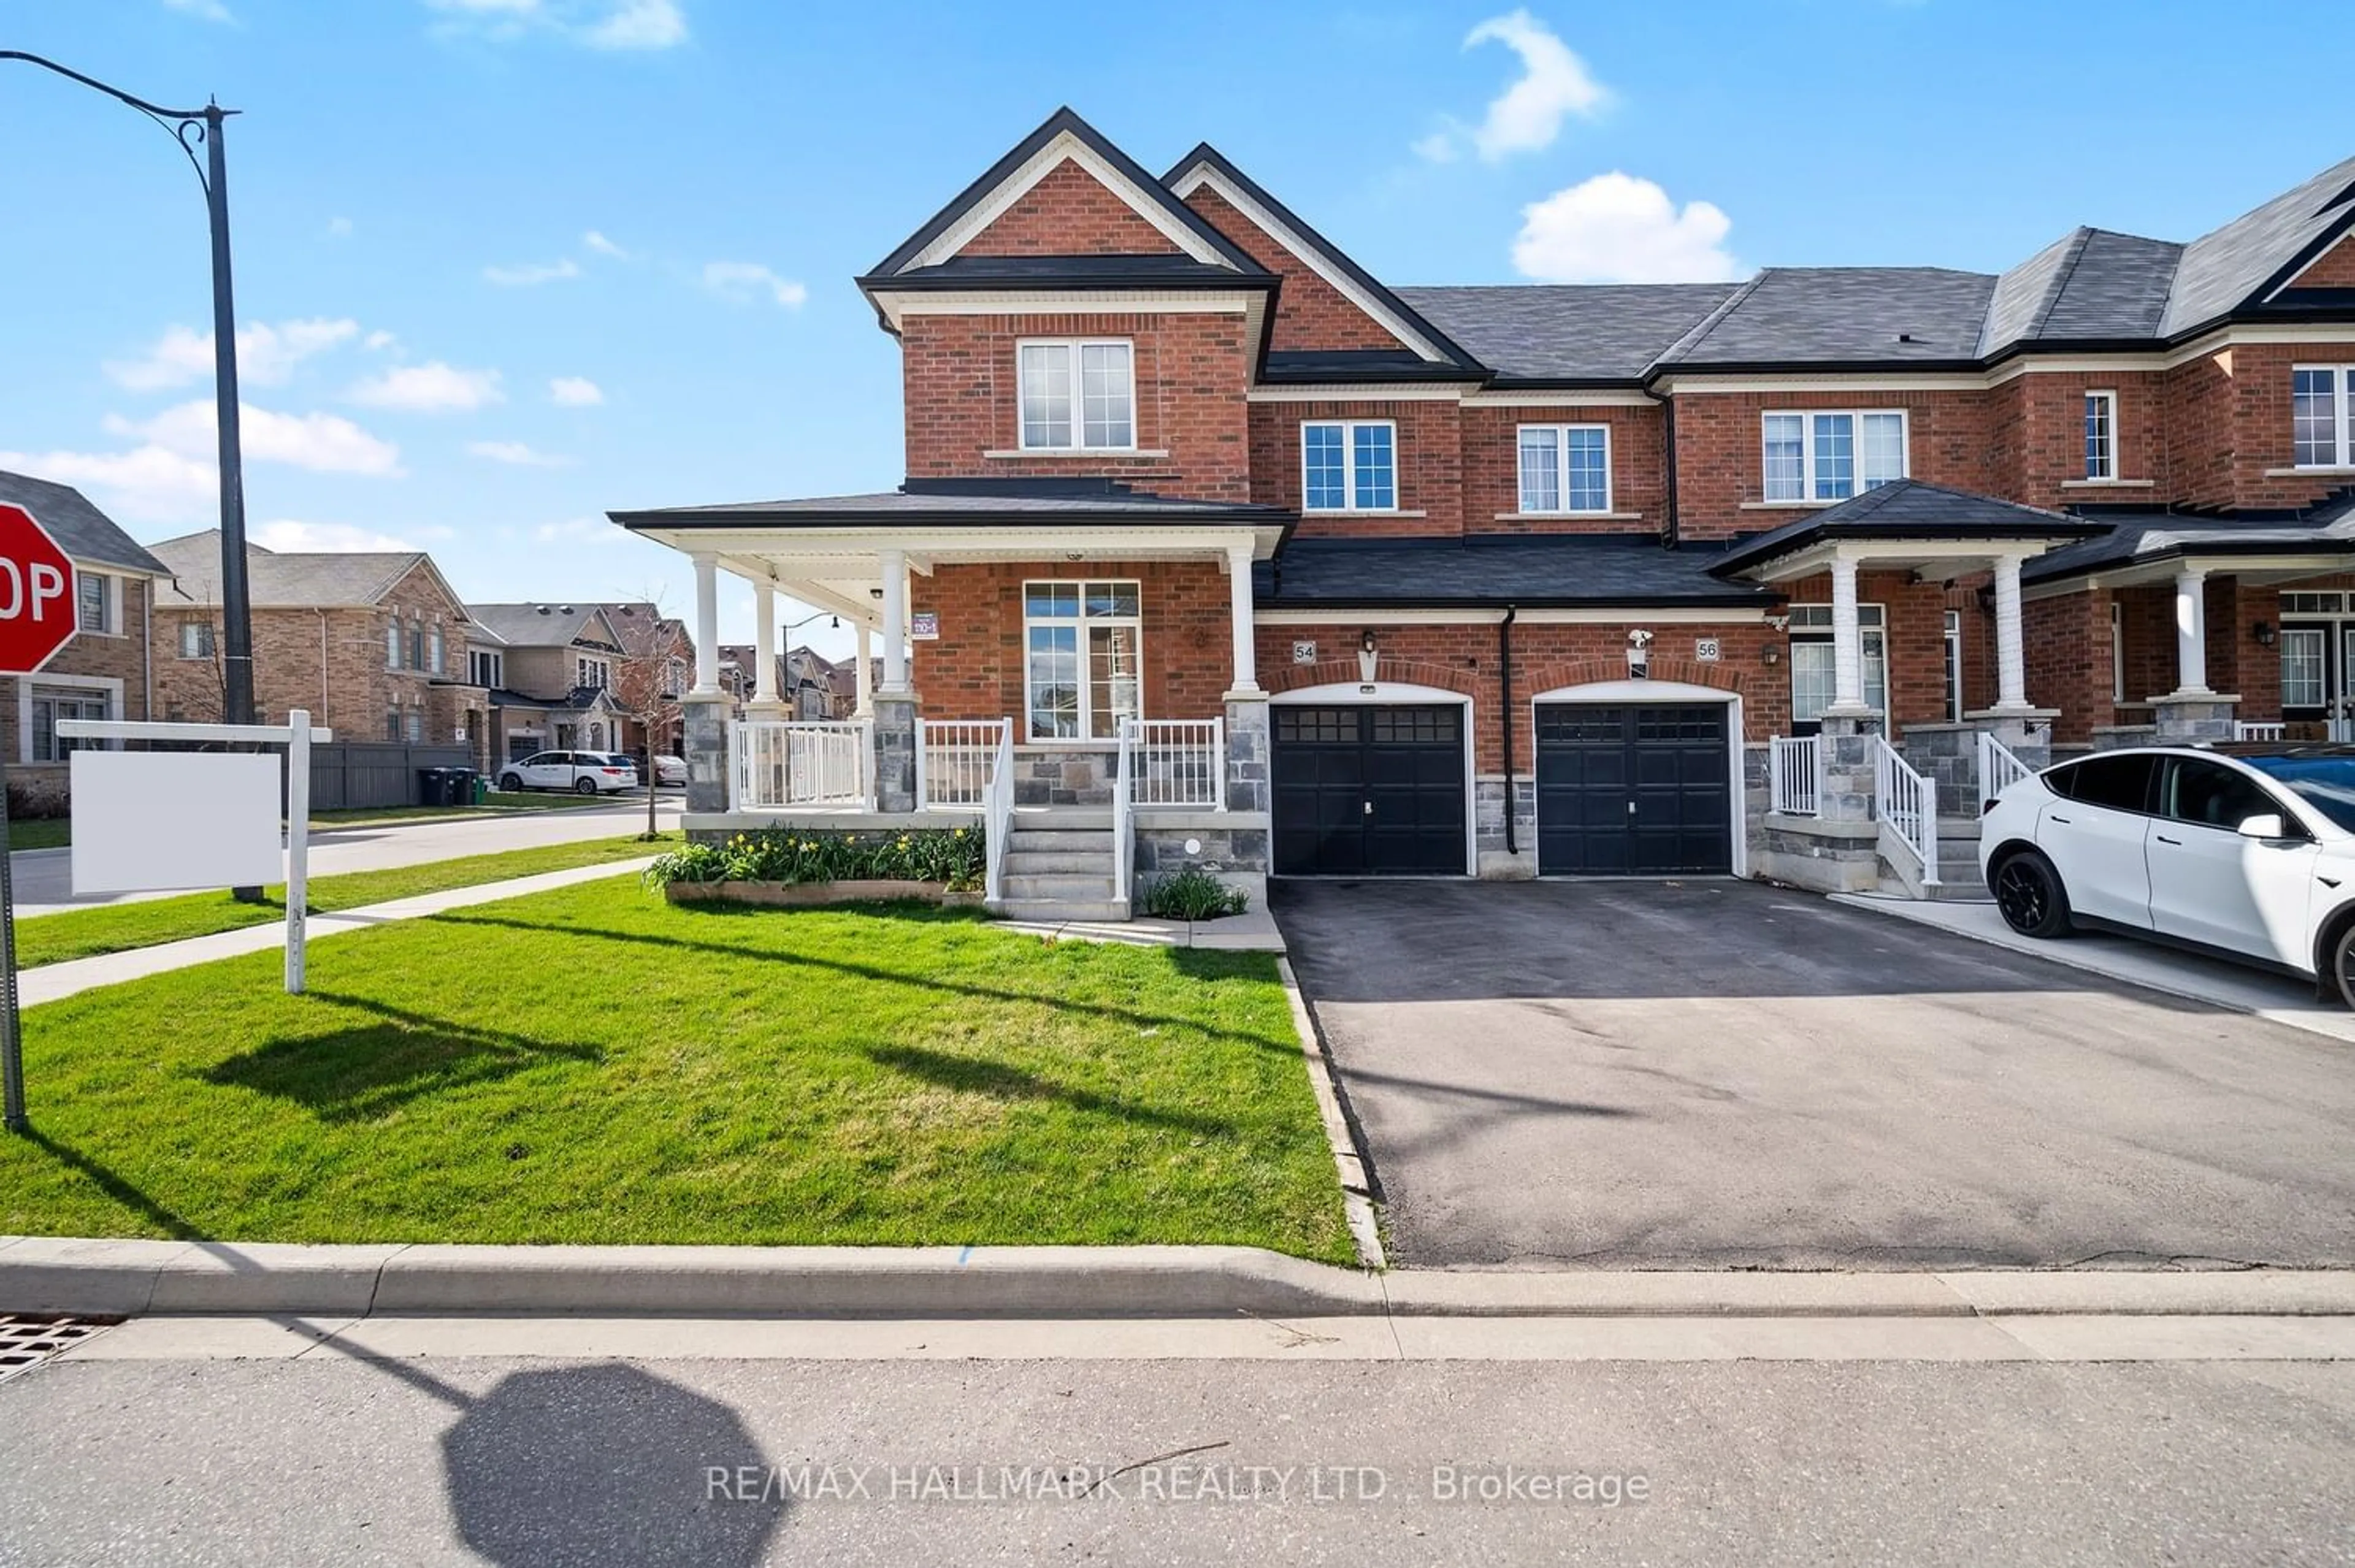 Frontside or backside of a home for 54 Yellowknife Rd, Brampton Ontario L6R 3X4